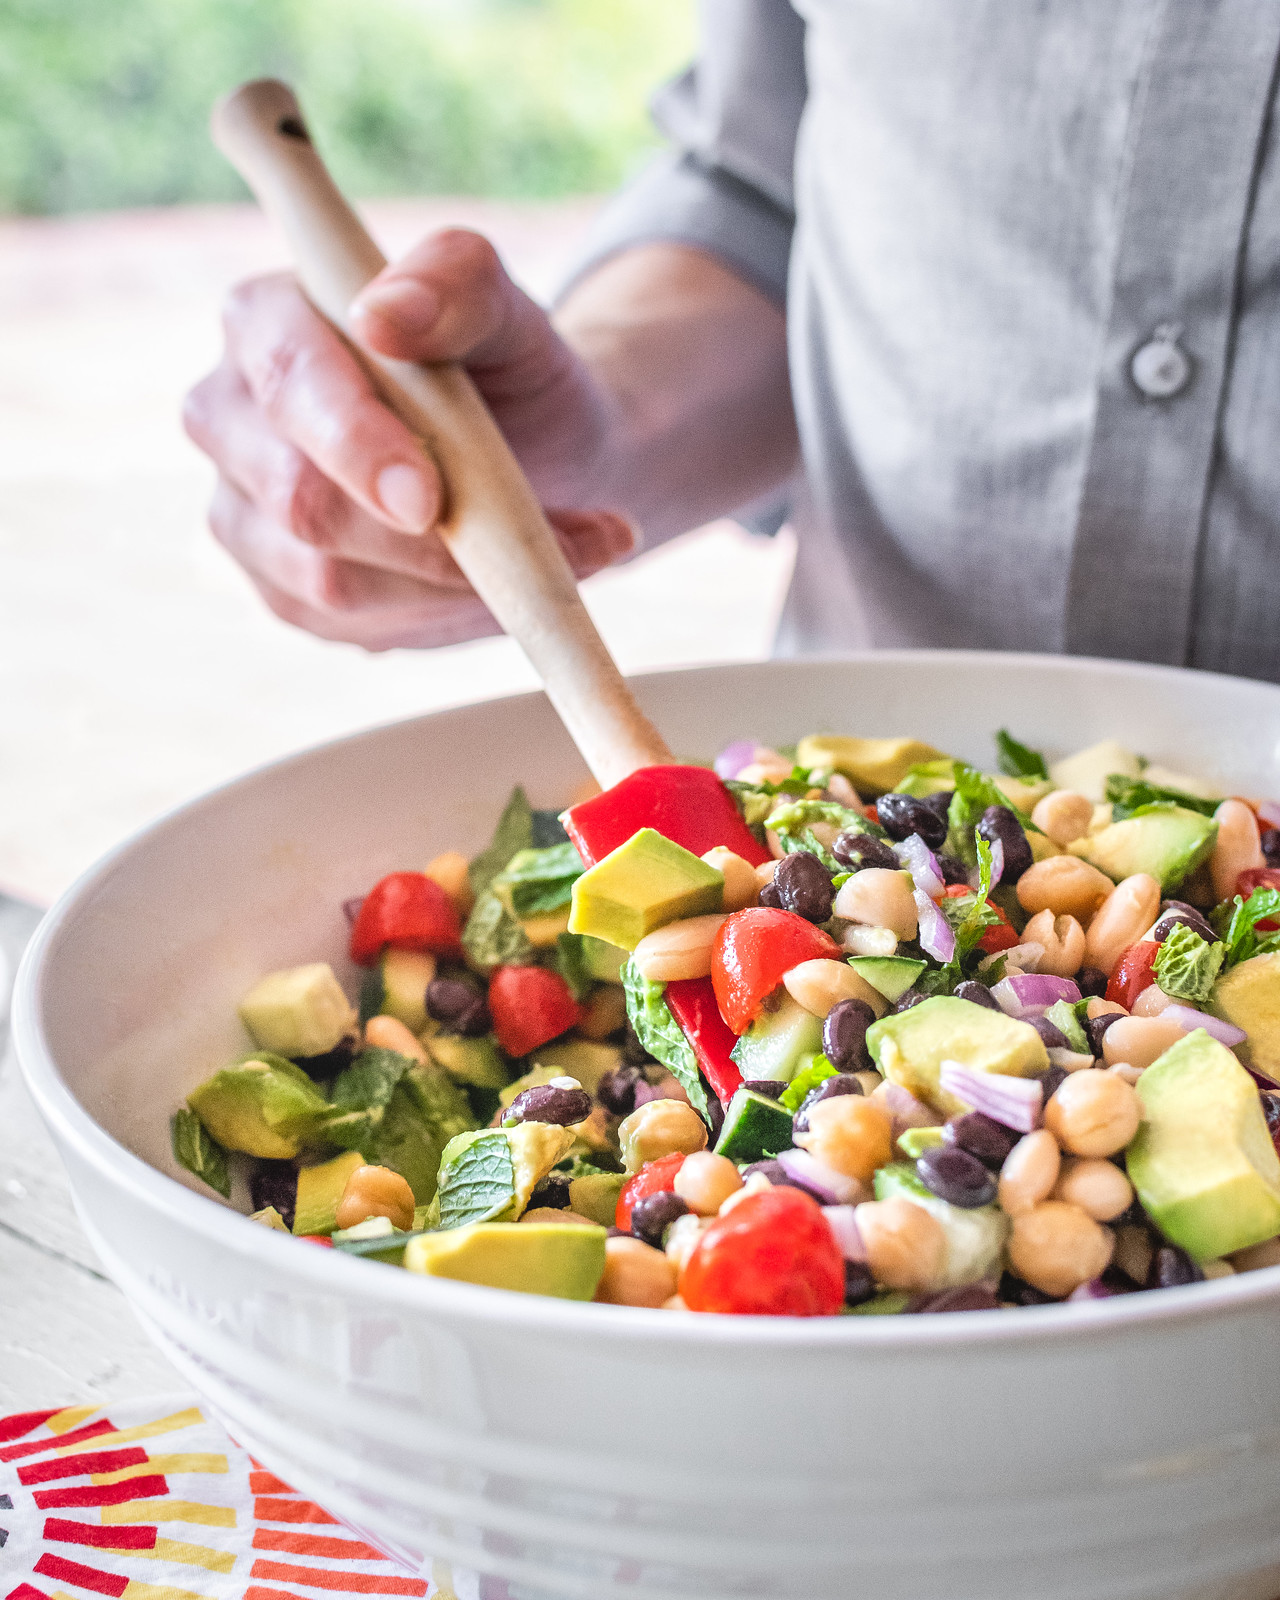 tossing a bowl of colorful chopped salad